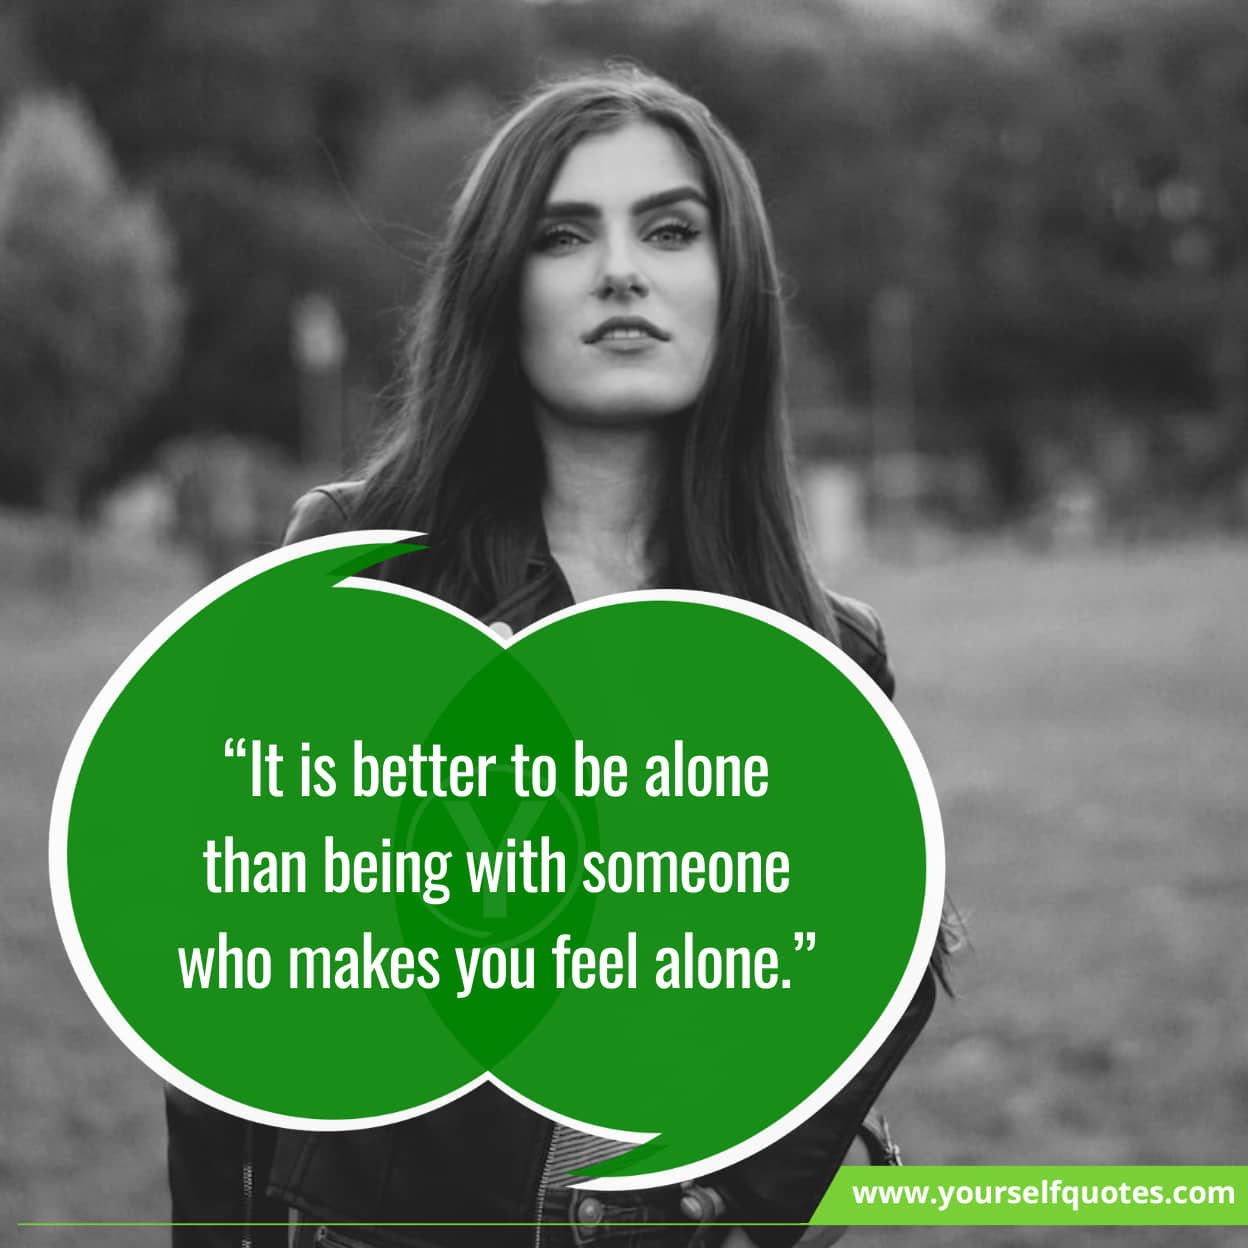 110 Alone Quotes Will Encourage You To Live In Loneliness